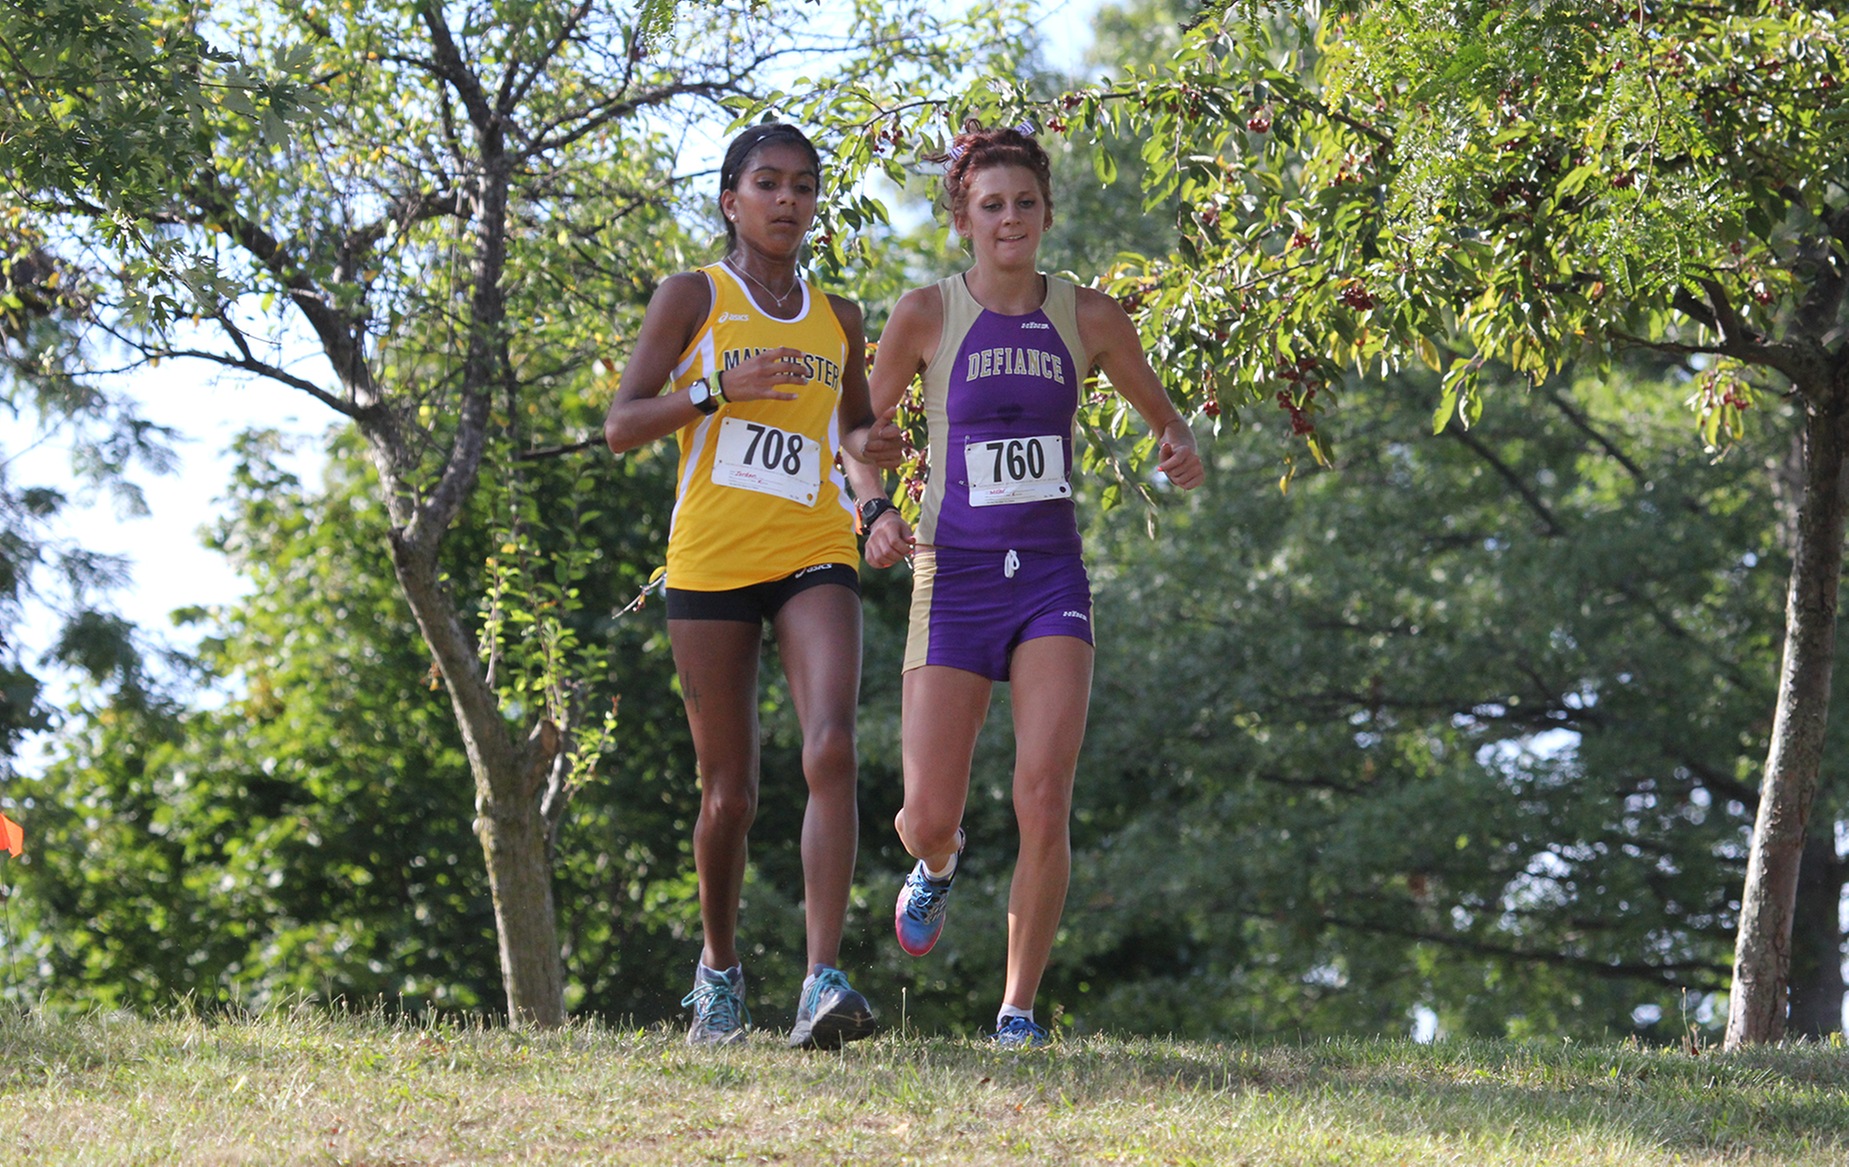 Miller takes third to lead DC at HCAC Championships